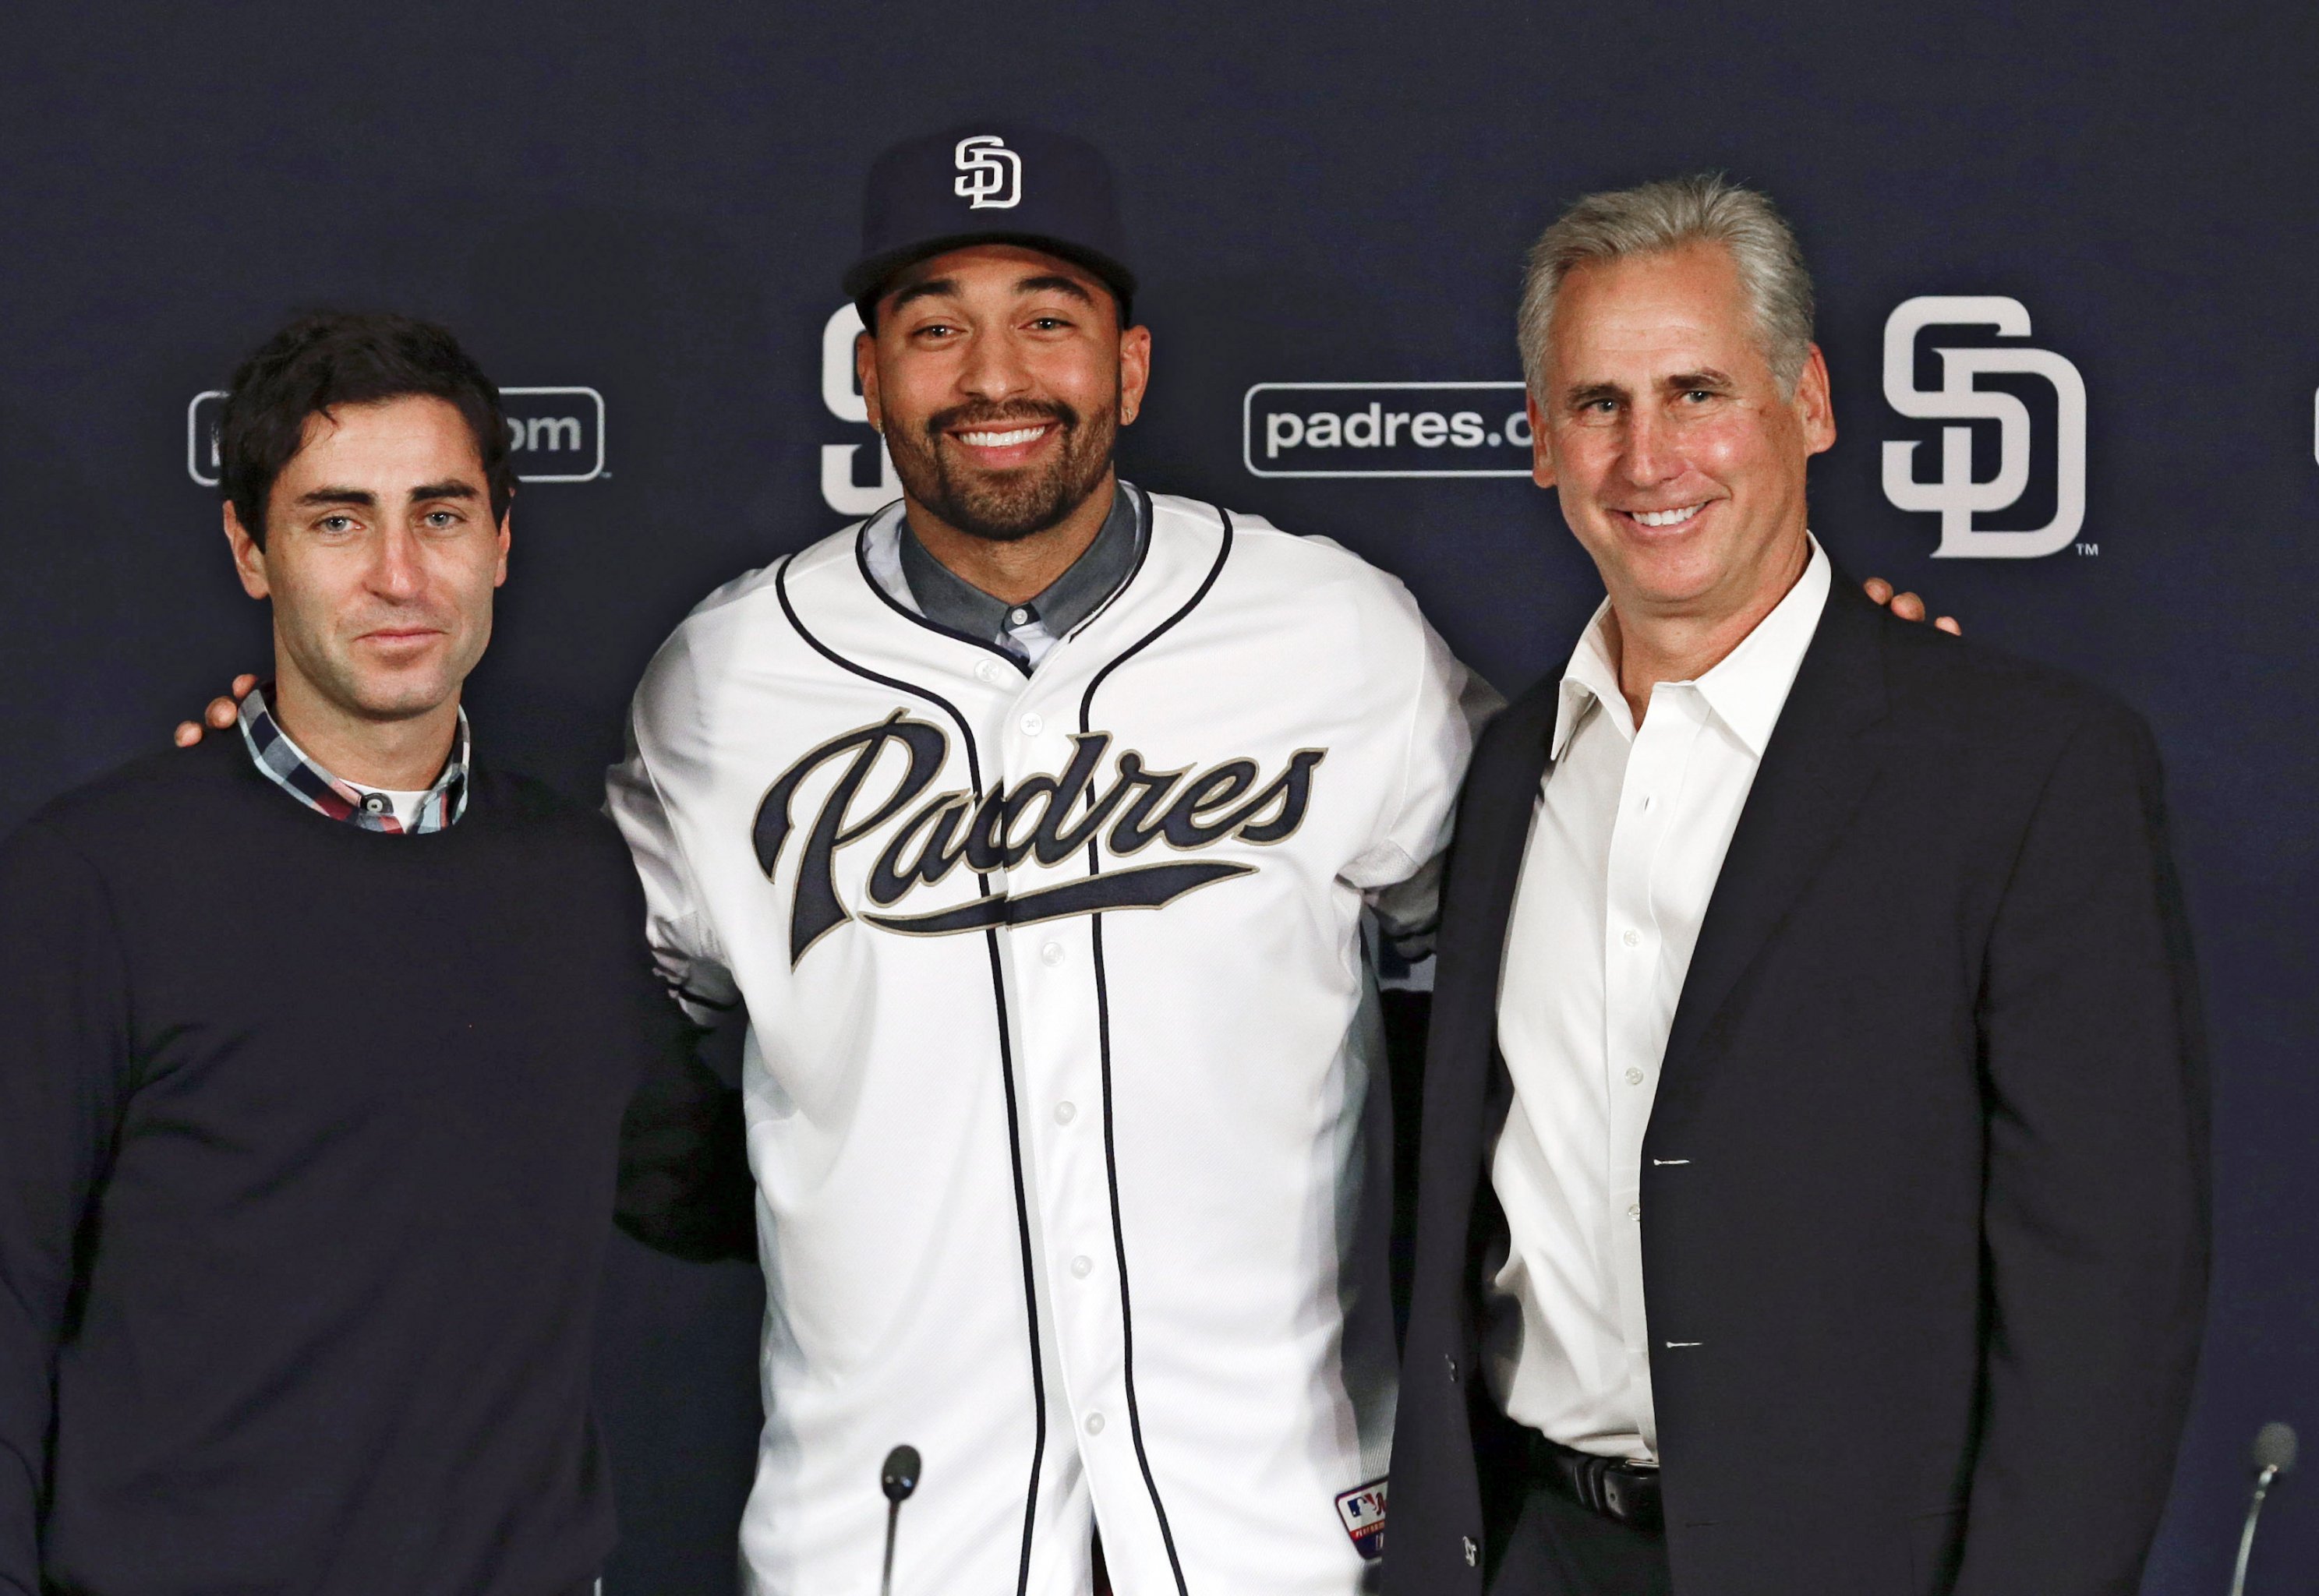 Padres notes: Padres' Nick Martinez bets on himself again; Stammen